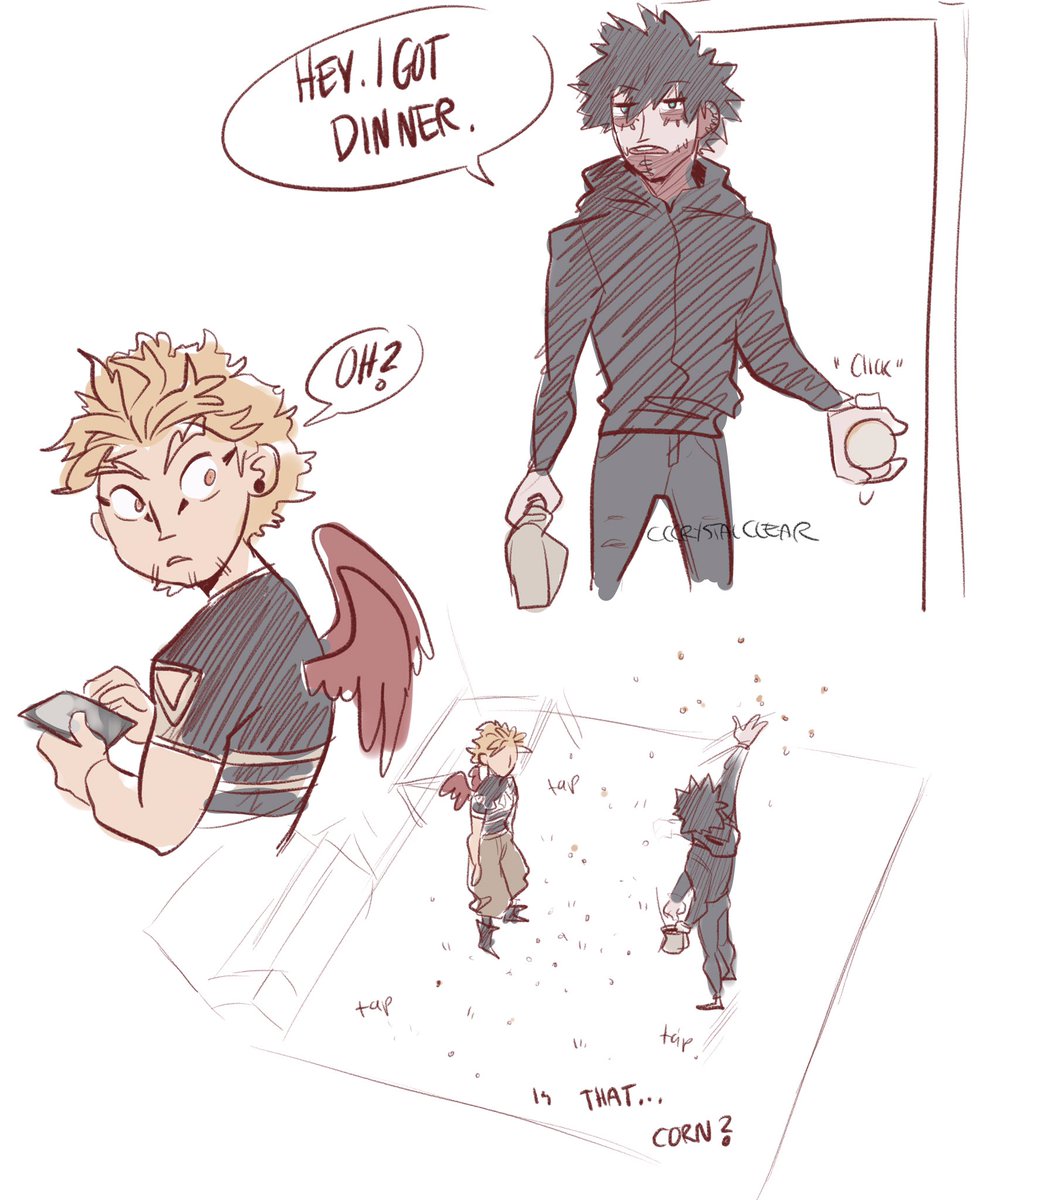 Do you want some salt with that corn? #dabihawks 